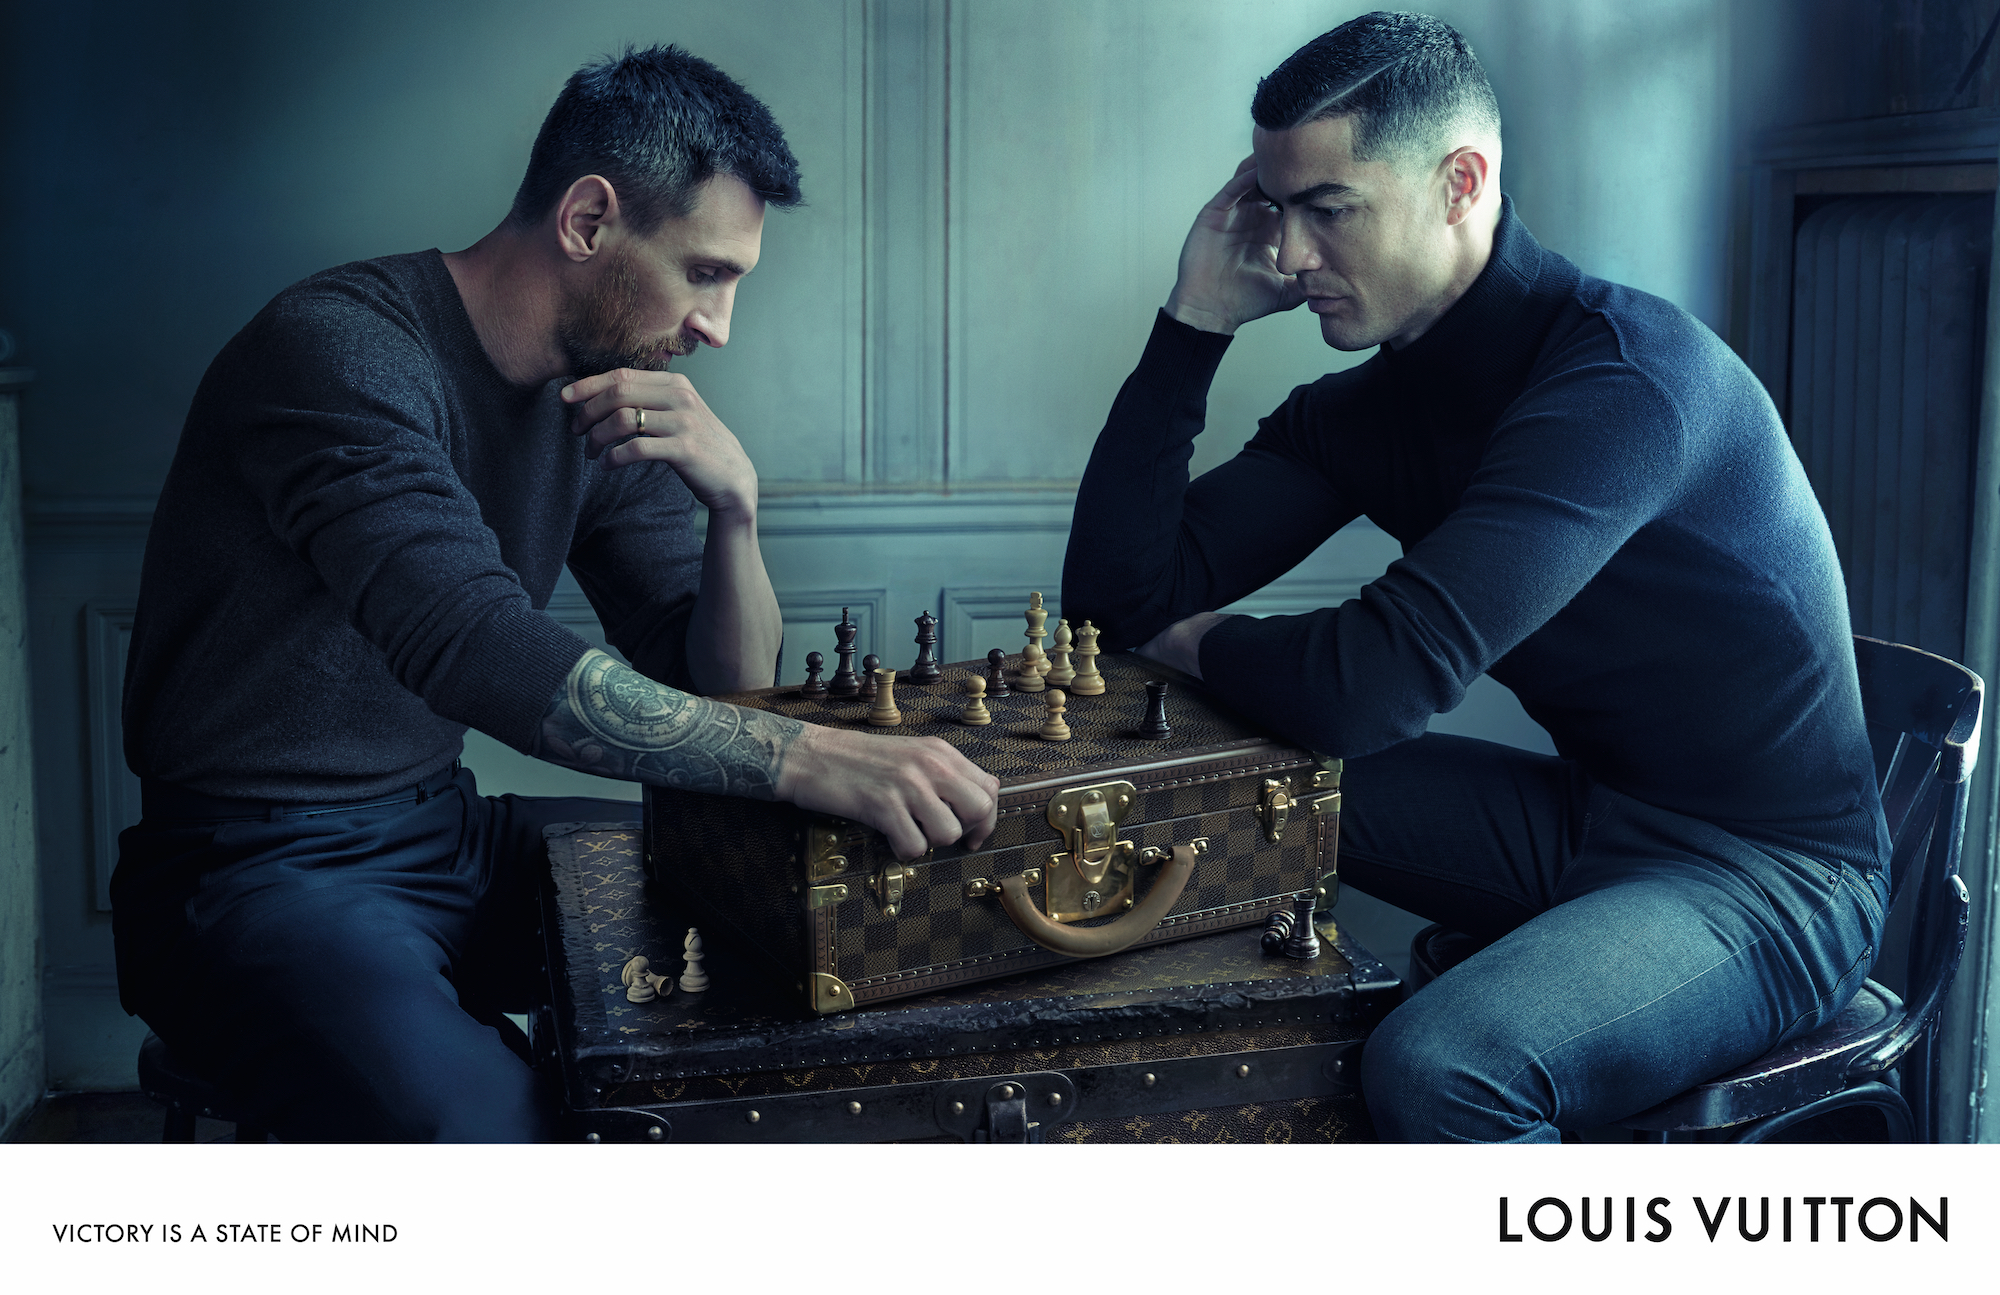 Louis Vuitton &quot;Victory is a state of mind,&quot; starring Cristiano Ronaldo and Lionel Messi, photographed by Annie Leibovitz